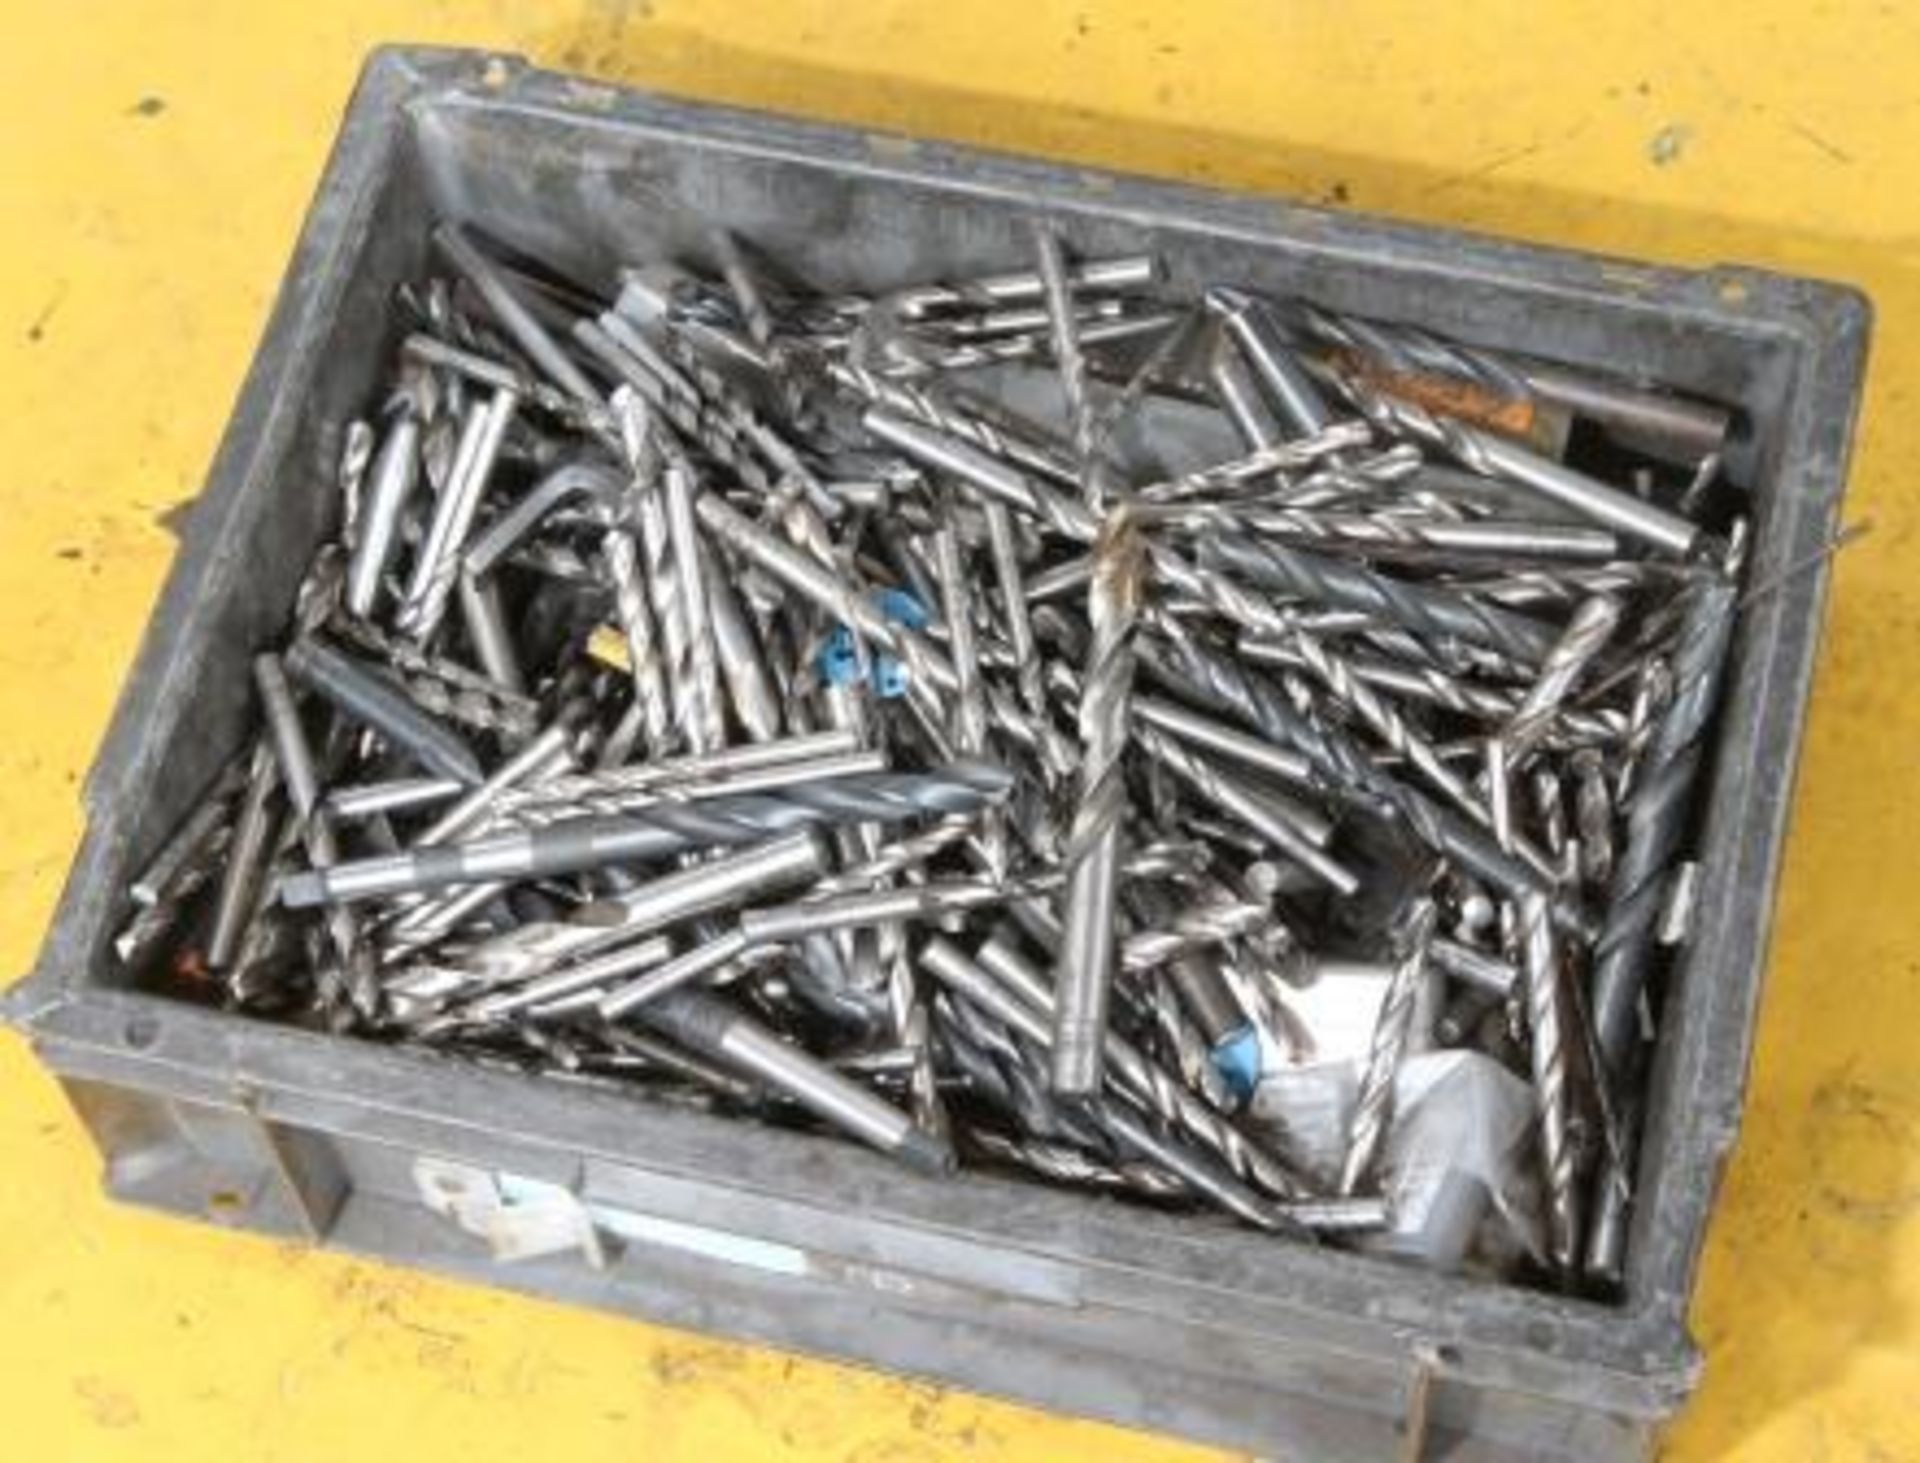 Assorted Lot of Drill Bits